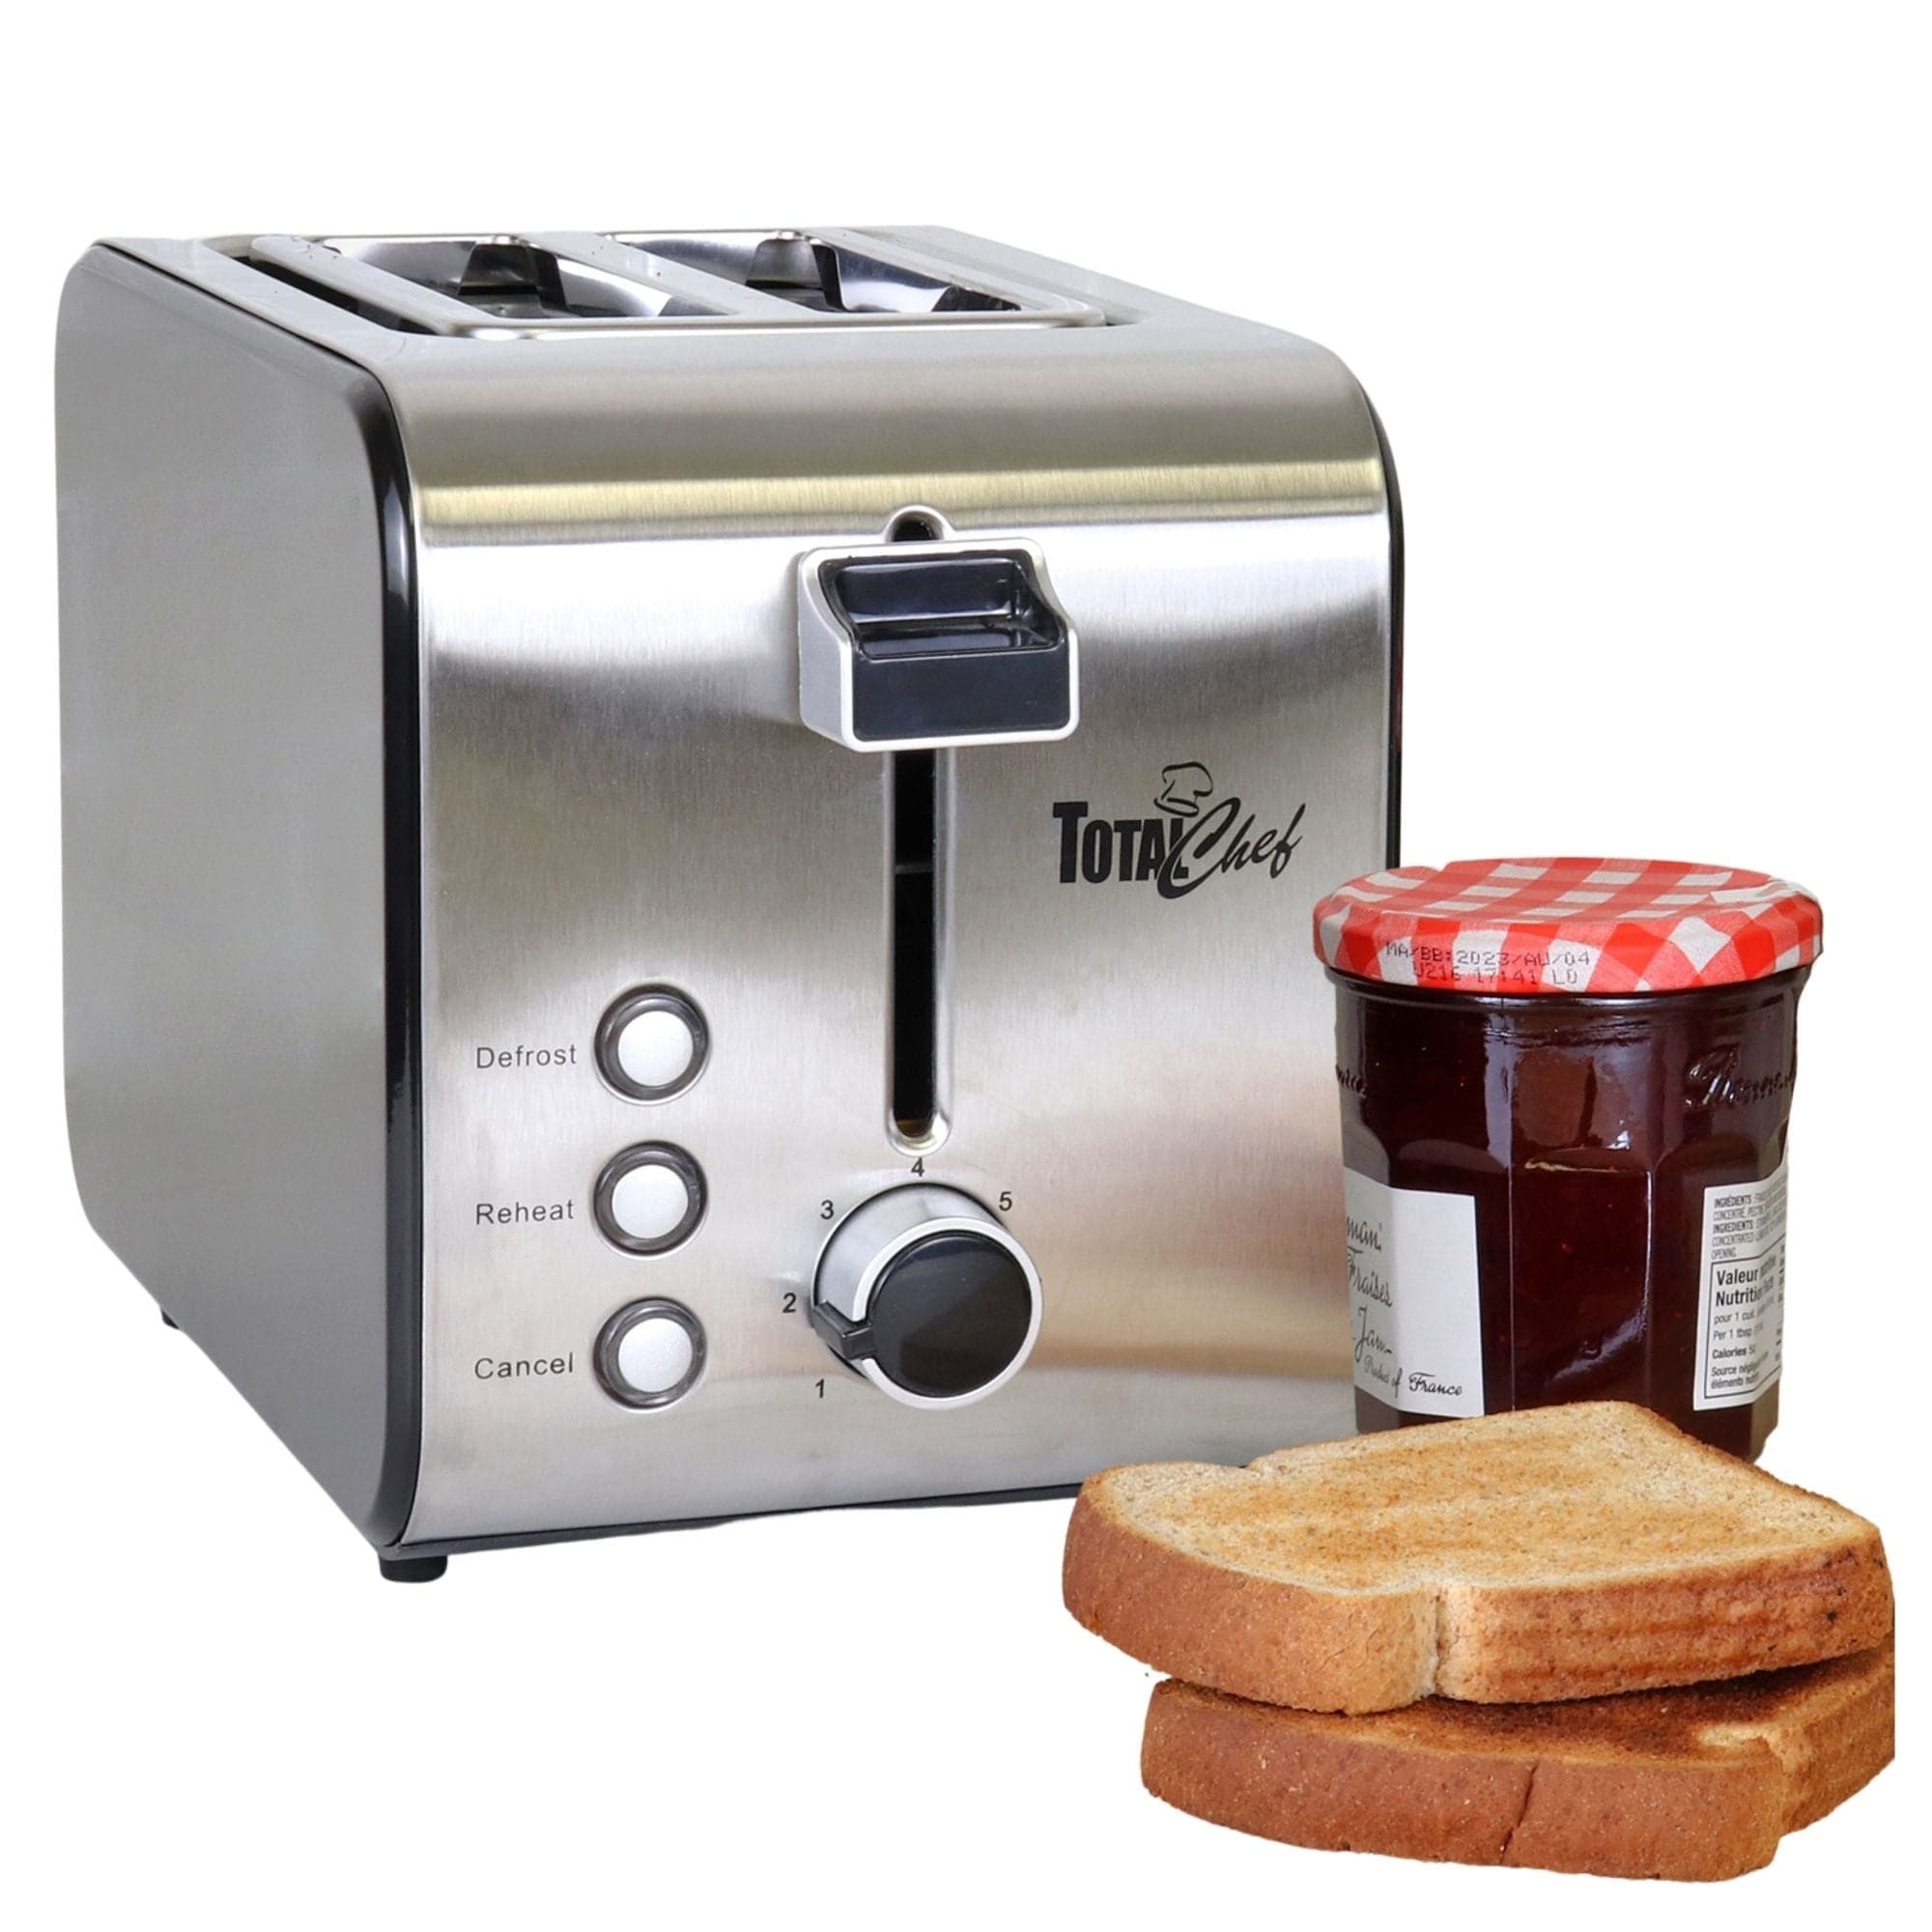 https://ak1.ostkcdn.com/images/products/is/images/direct/0879478dc8e4f19a81831cb1c226b7a22dd866c0/Total-Chef-2-Slice-Compact-Wide-Slot-Toaster-with-7-Shade-Settings%2C-Stainless-Steel%2C-Defrost-and-Reheat%2C-Black-and-Silver.jpg